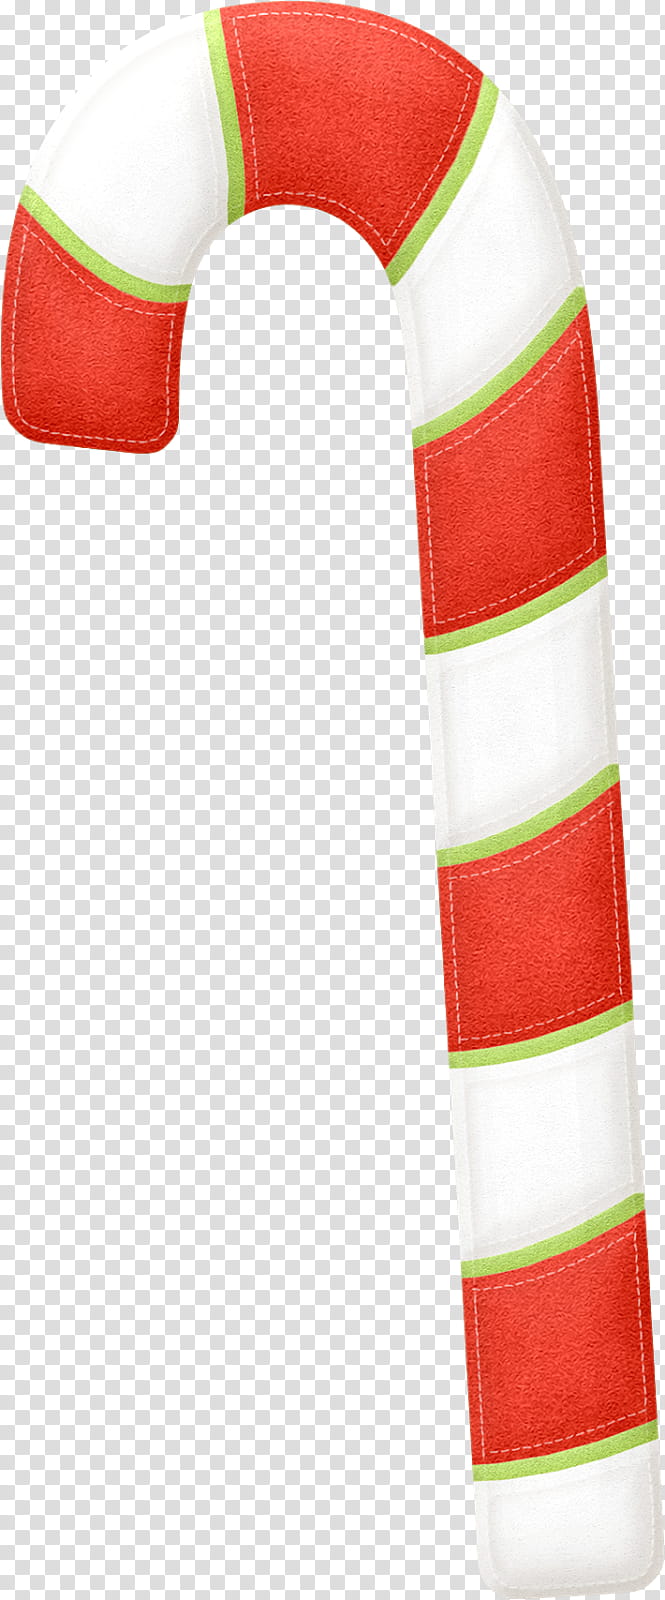 Christmas And New Year, Christmas Day, Candy Cane, Party, Snowman, Saint Patricks Day, Animation, Thanksgiving transparent background PNG clipart